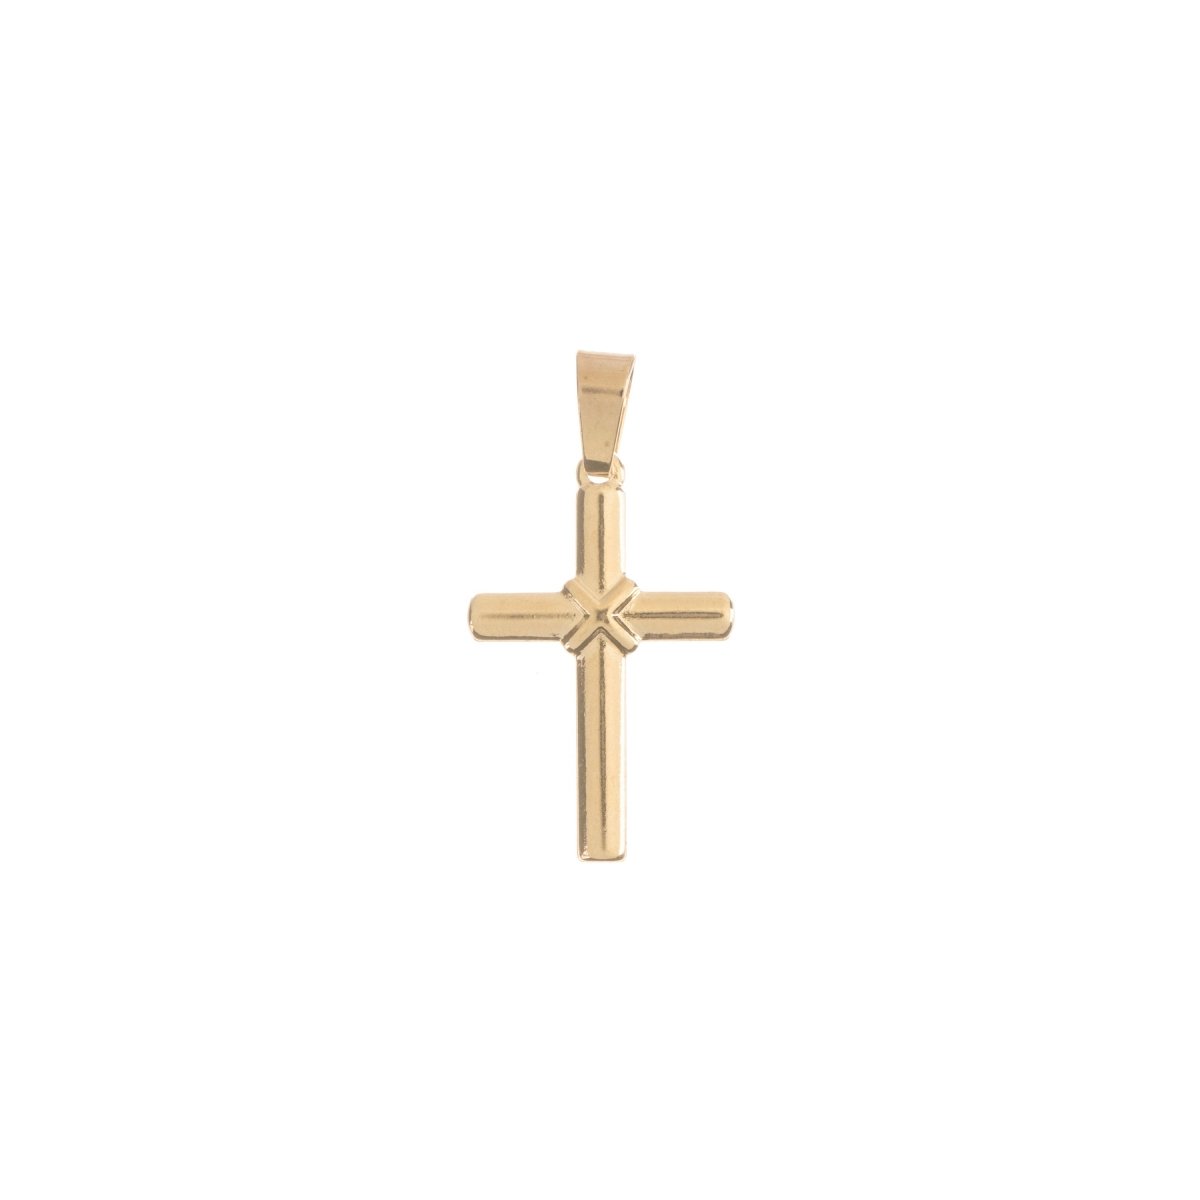 DEL- 18K Gold Filled Simplistic Modern Cross, Jesus Christ God, Women Ladies Bails Findings for Necklace Charm Pendant Jewelry Making Supplies - DLUXCA